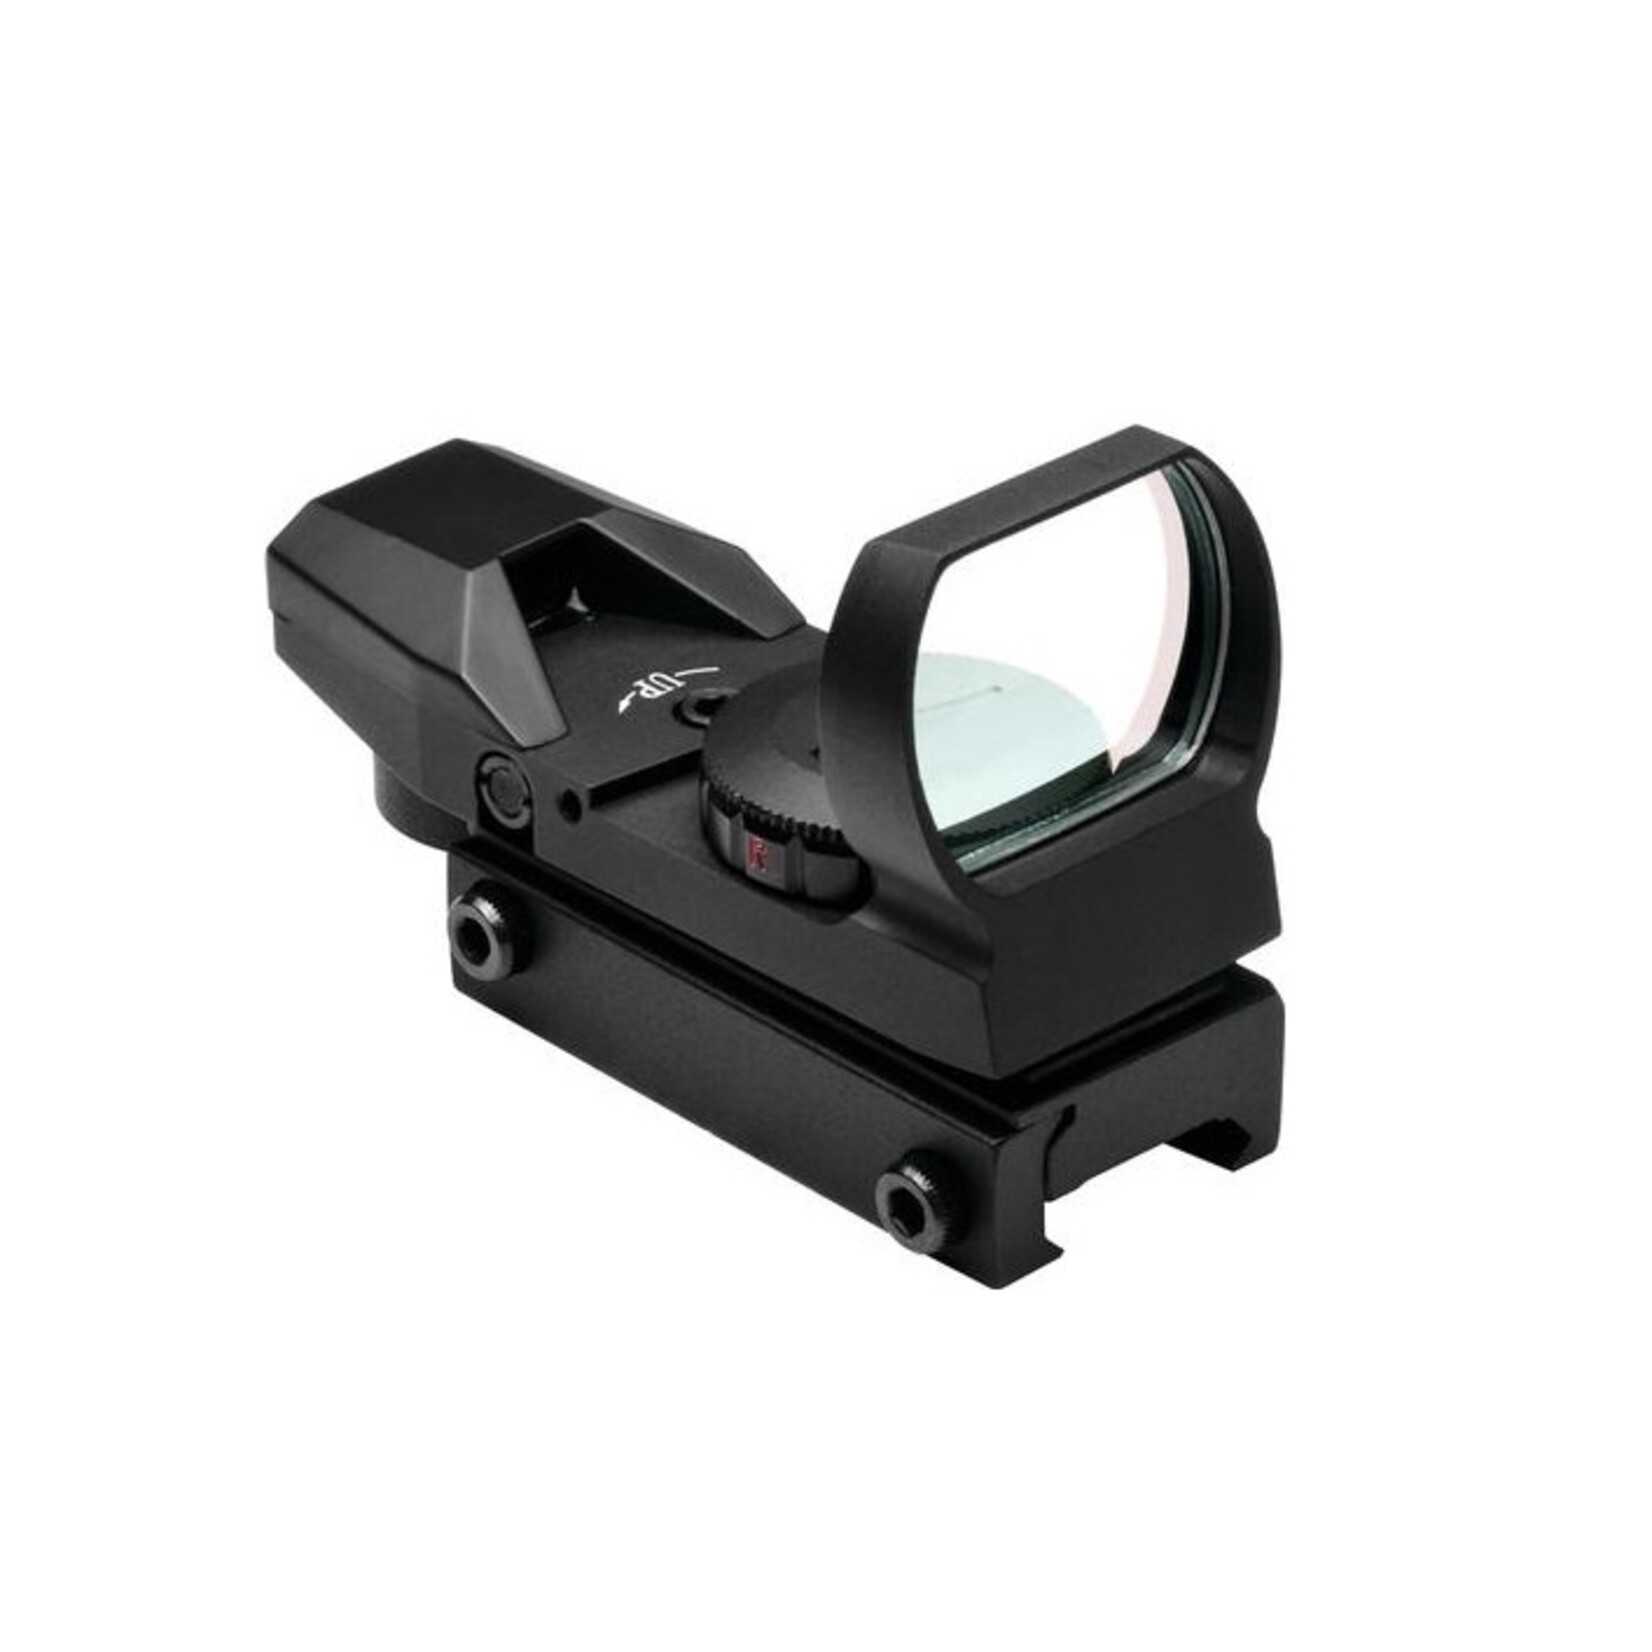 NCSTAR 4 RETICLE REFLEX OPTIC (RED,GREEN)